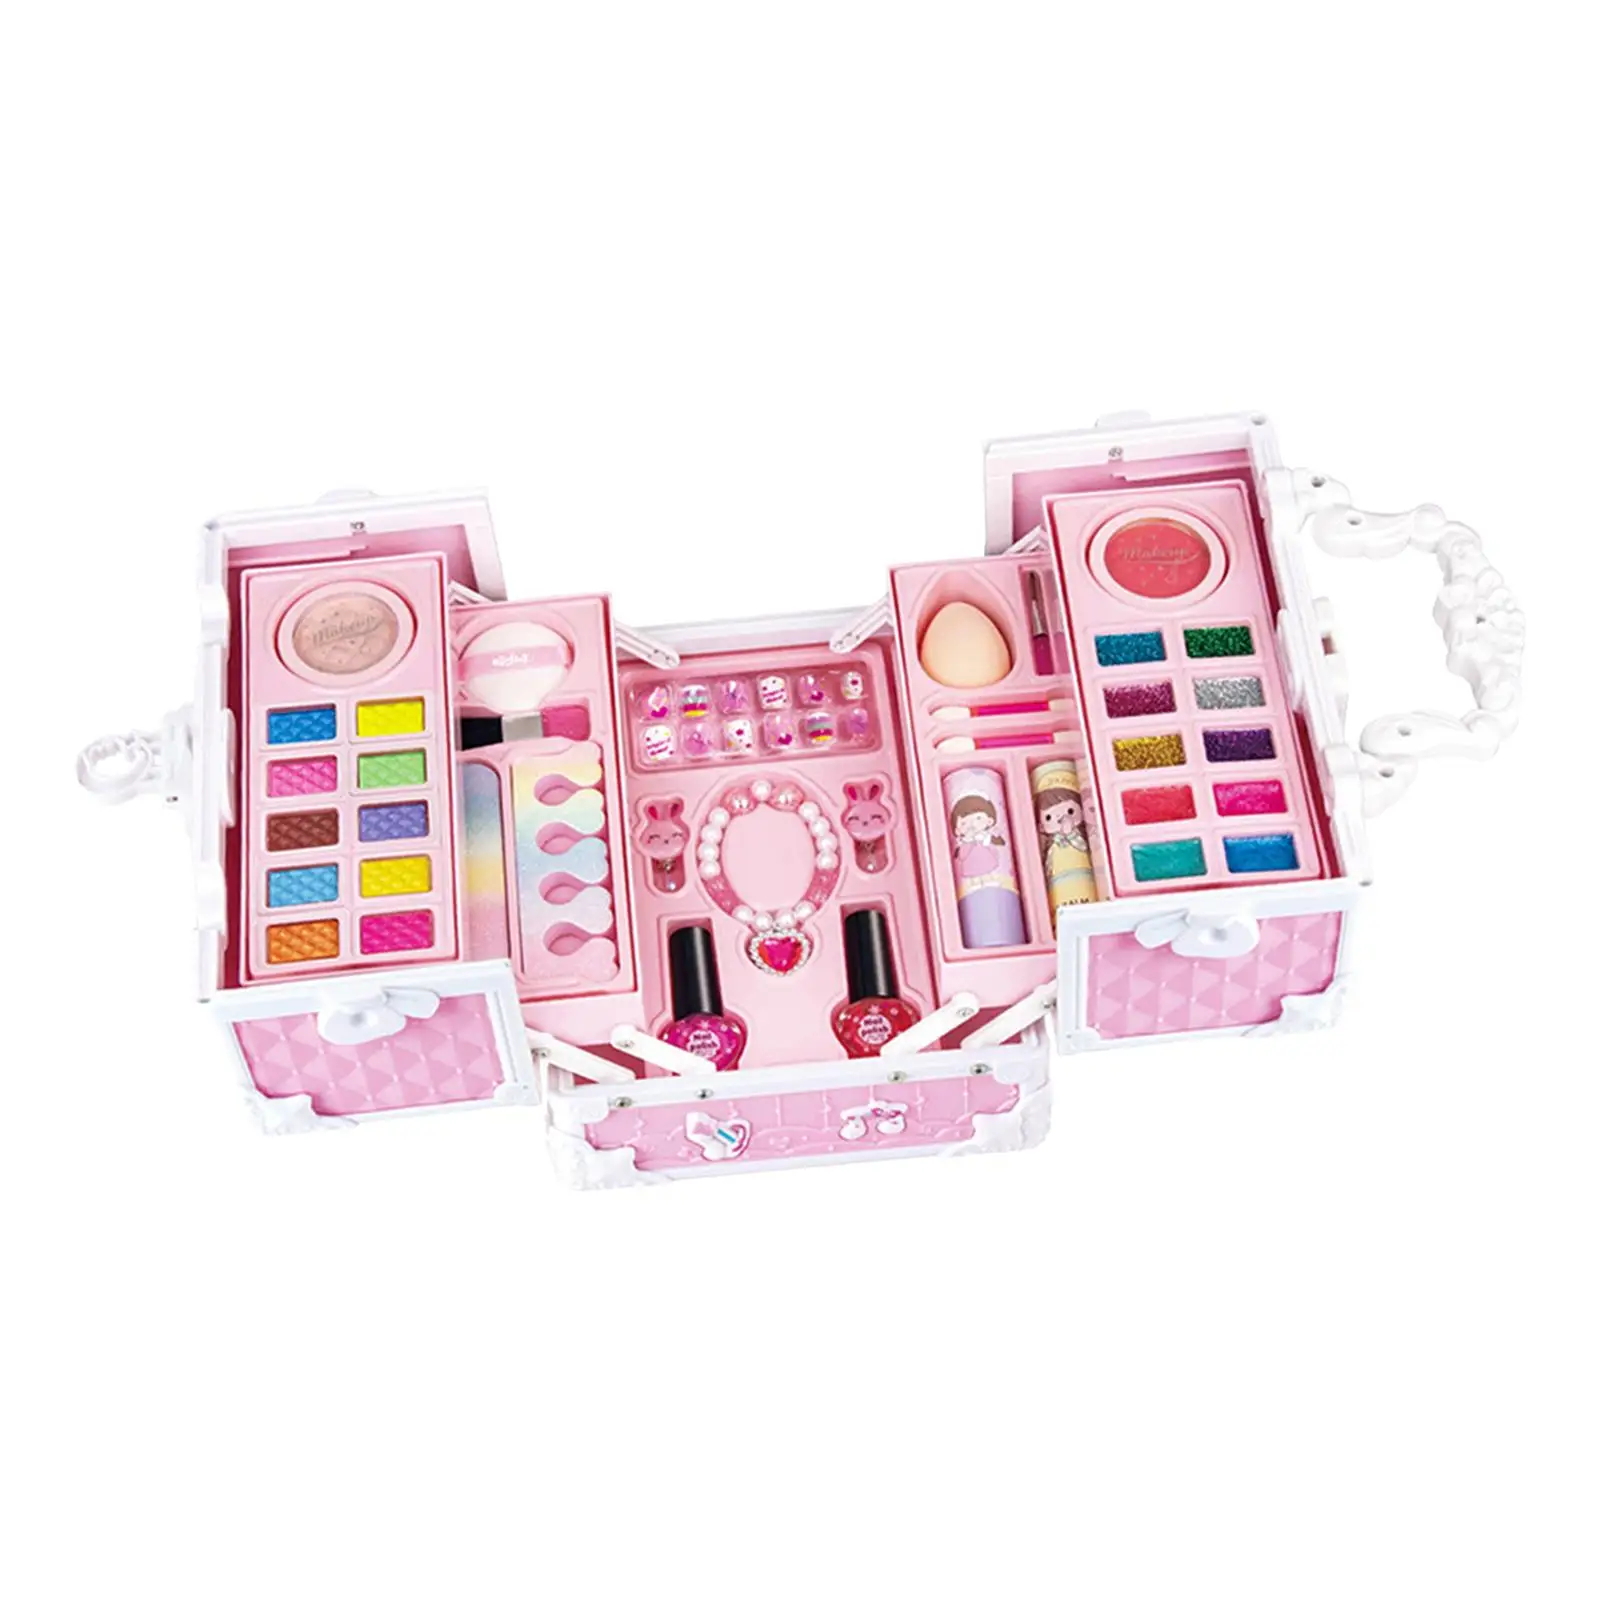 Makeup Toy Kits Pretend Cosmetic Makeup Accessories Role Playing Pretend Makeup Kits for Kids Girls Children Toddlers Halloween